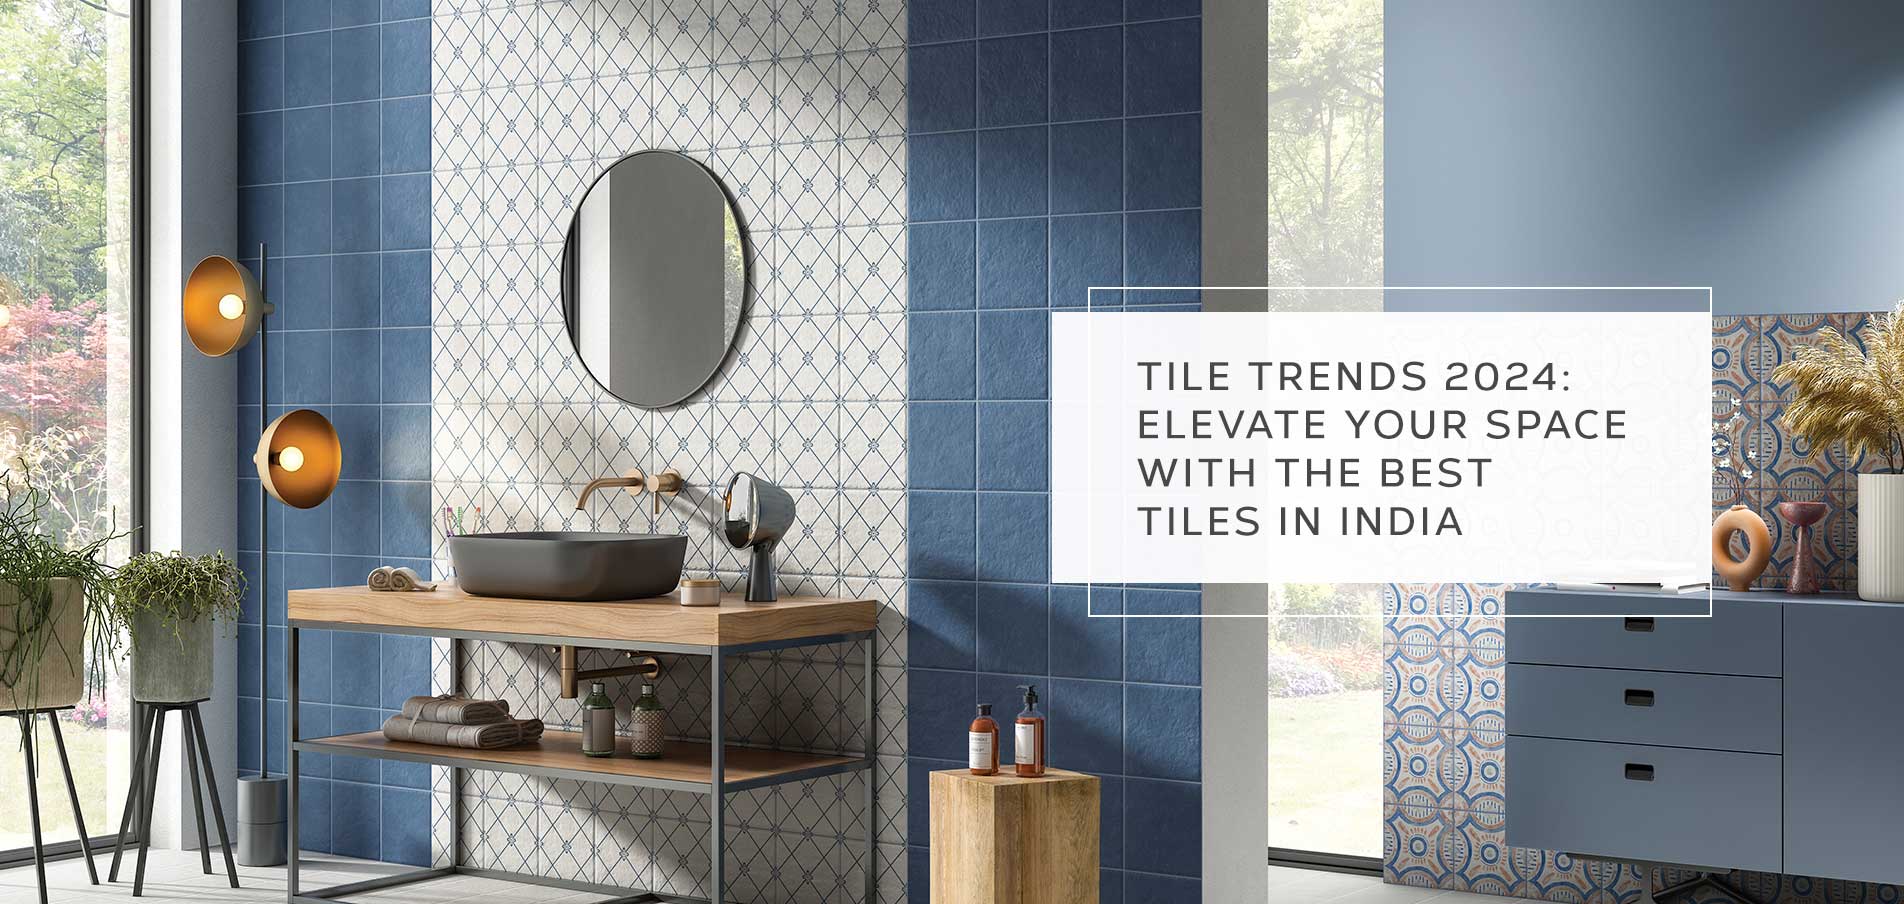 Tiles Trends 2024: Elevate Your Space With The Best Tiles In India